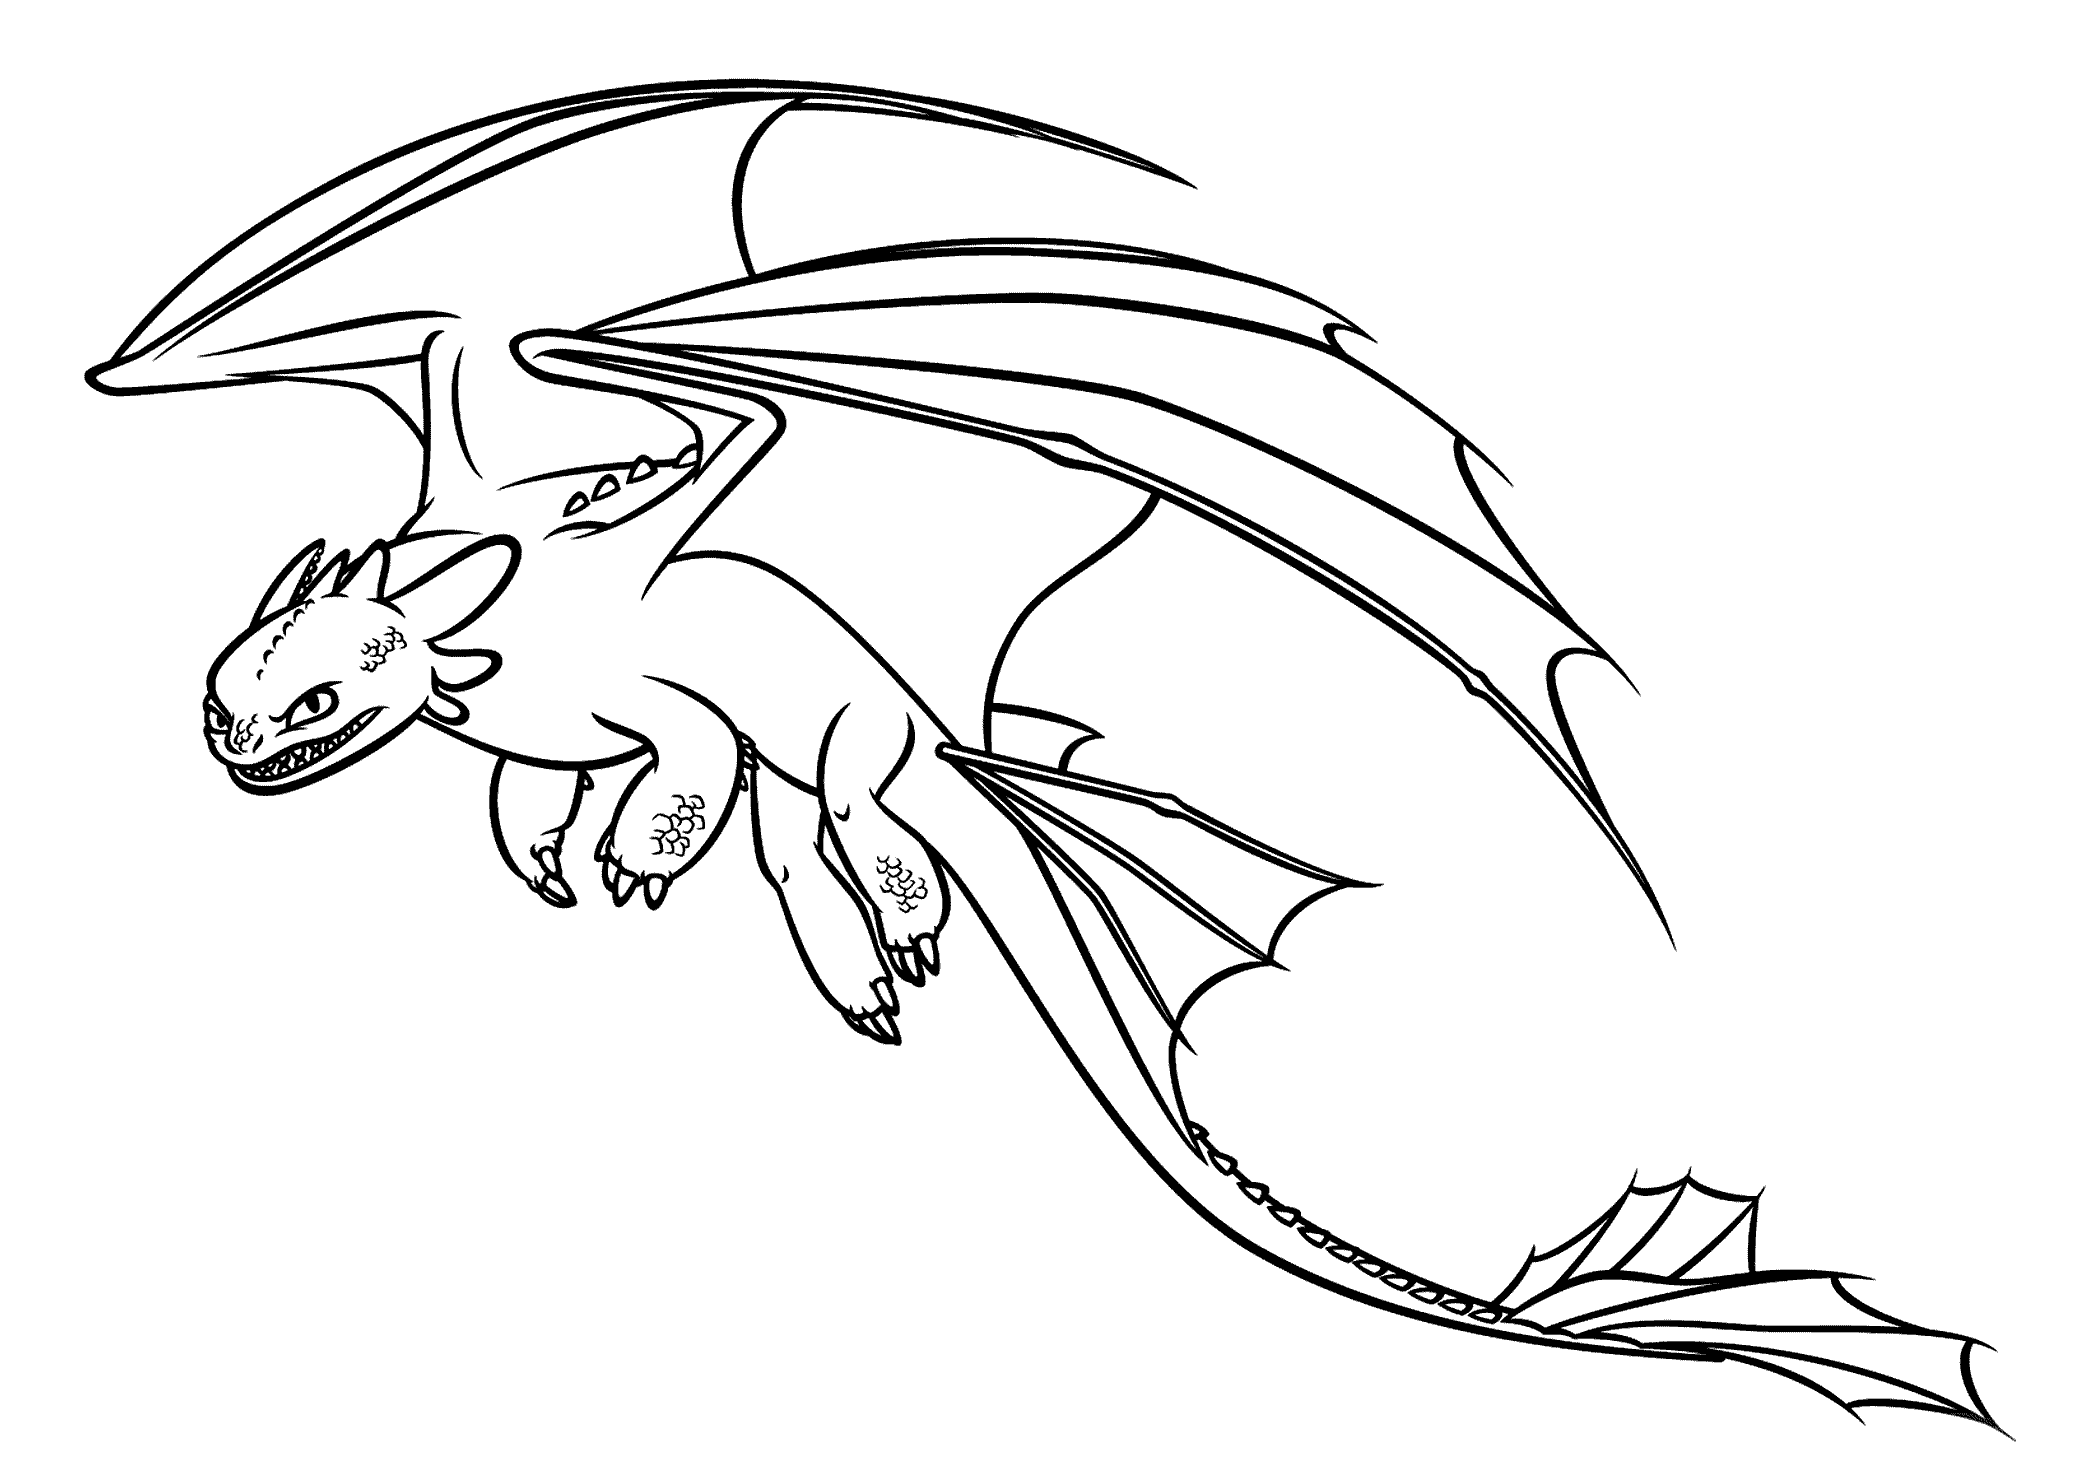 toothless-dragon-drawing-at-getdrawings-free-download